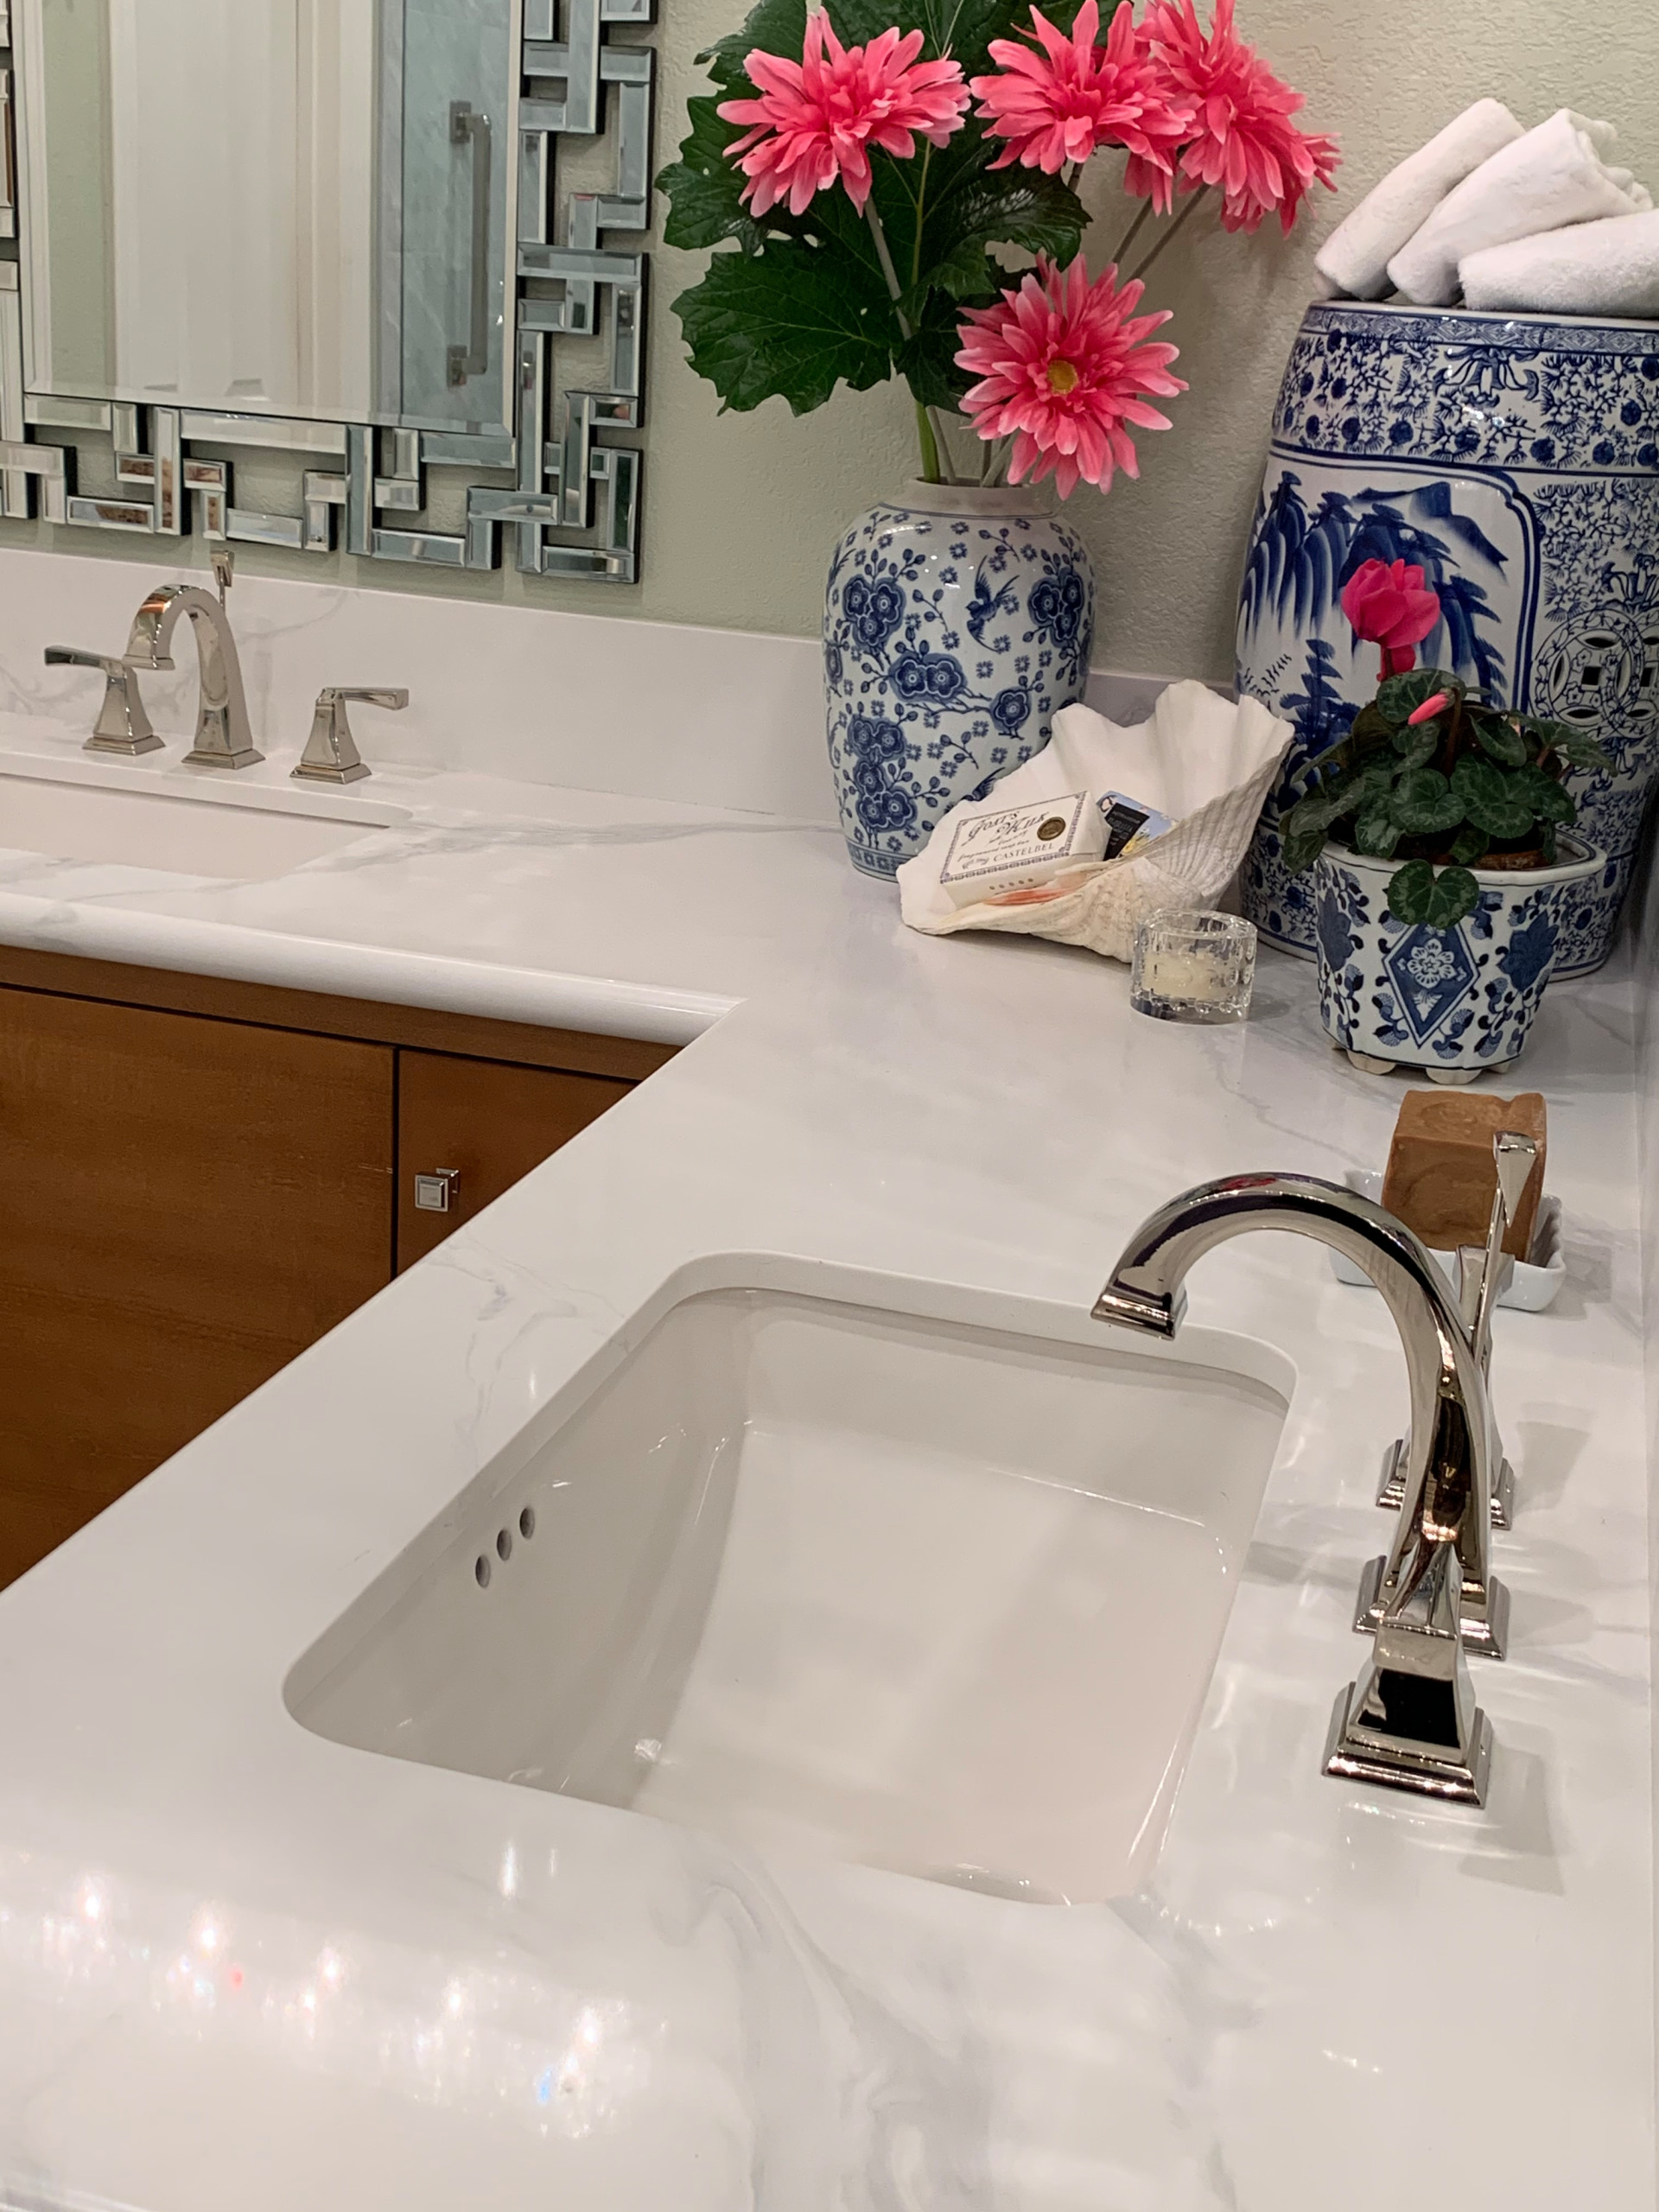 DOUBLE SINKS W/SPACIOUS LAZY SUSAN SEPARATING